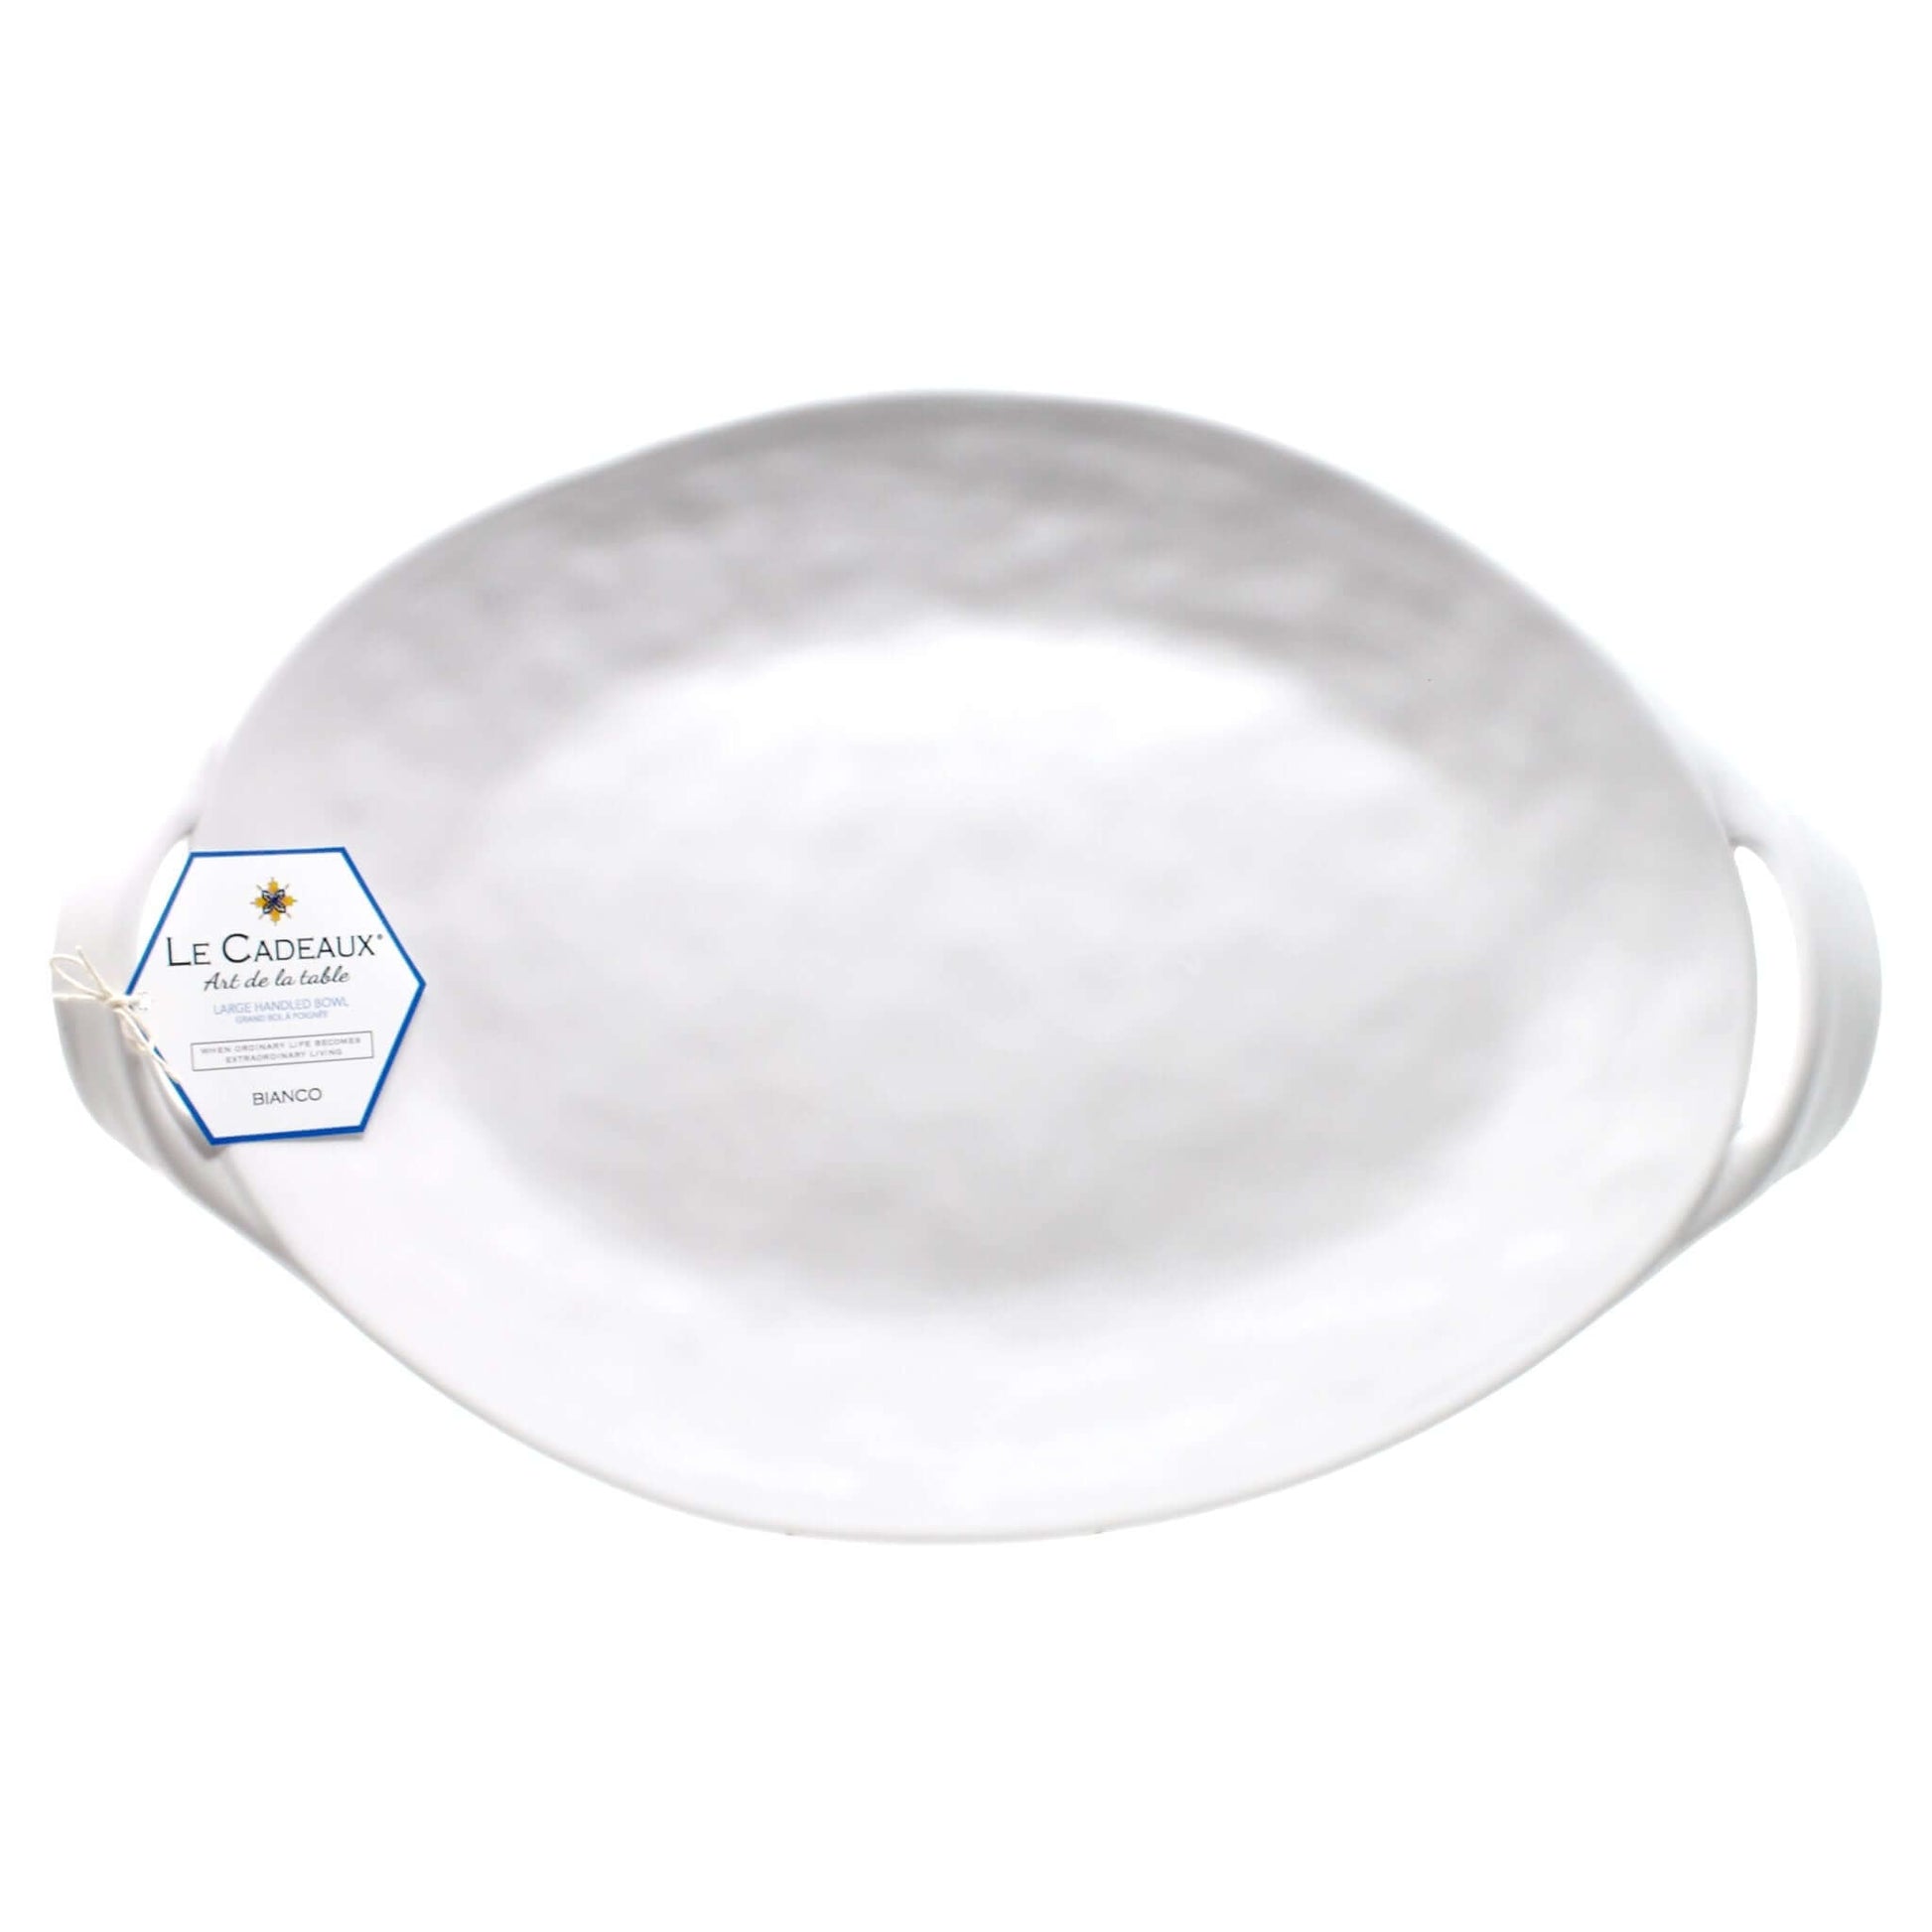 Bianco Large Two Handled Oval Platter 18" - Royalties